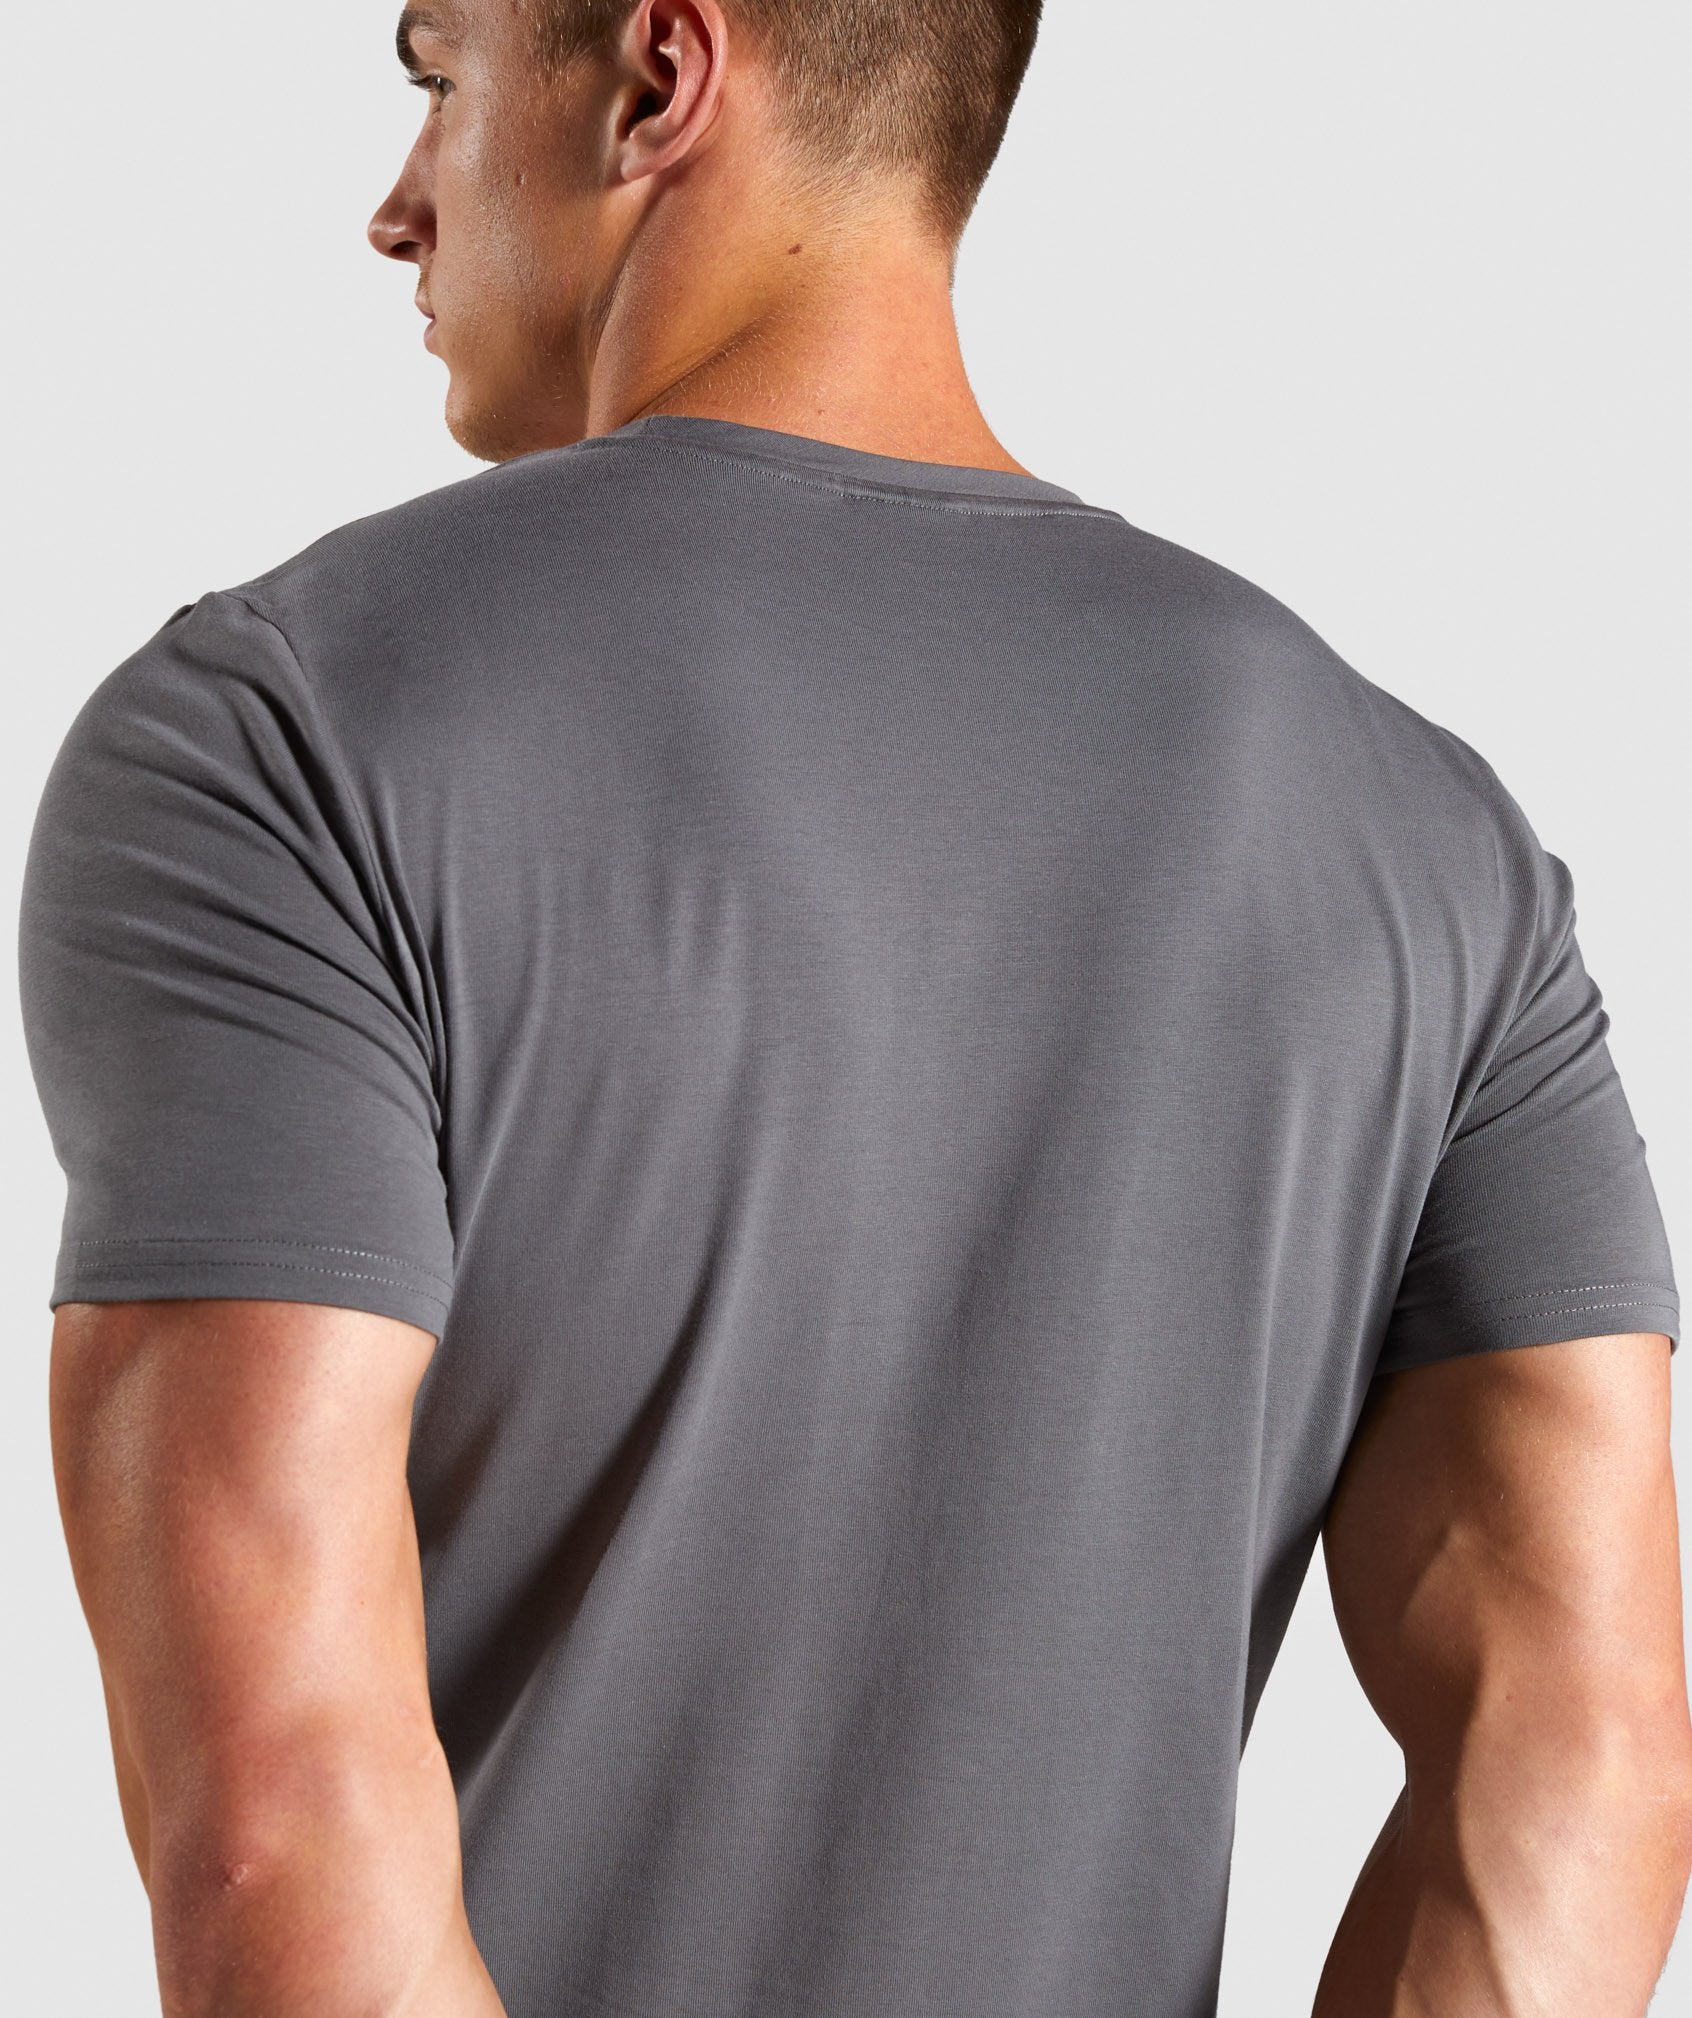 Base T-Shirt in Grey - view 6